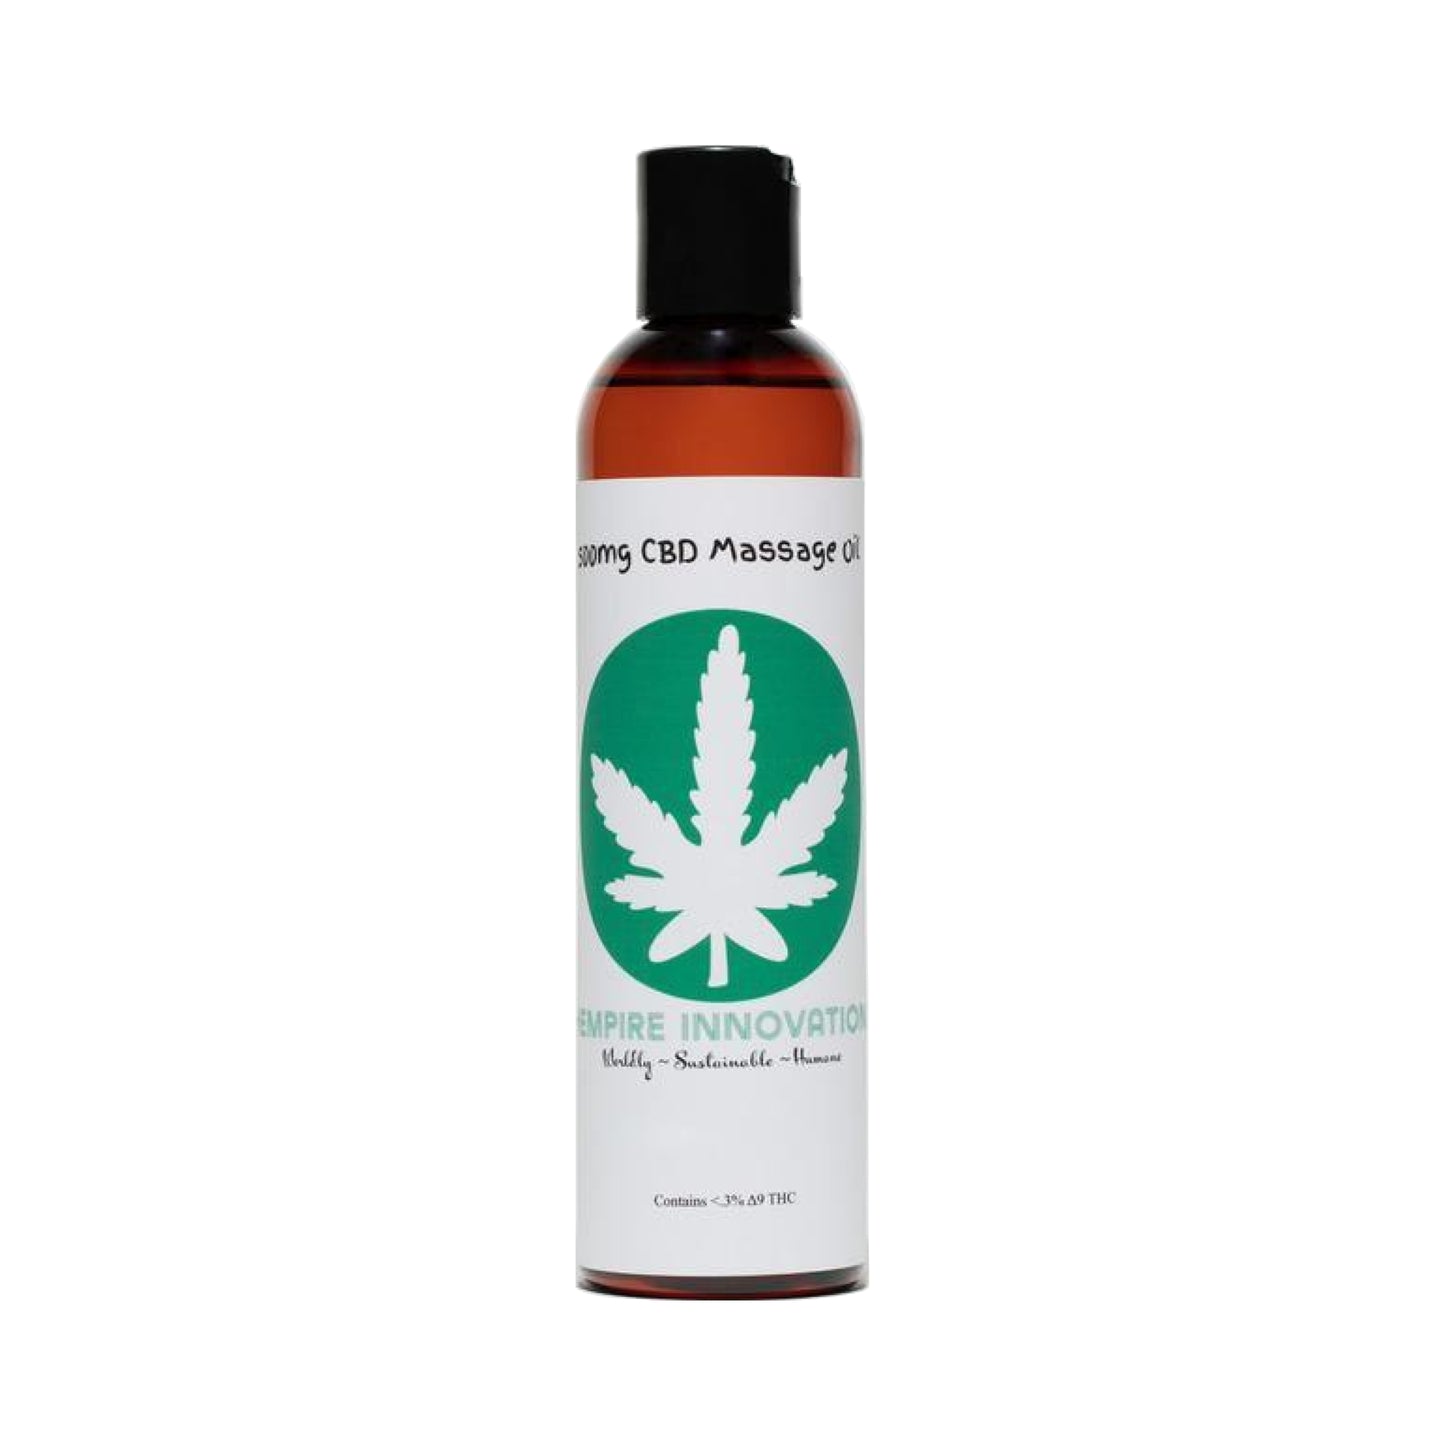 Bottle of 500mg CBD Massage Oil, designed for optimal absorption and near-instantaneous effects.